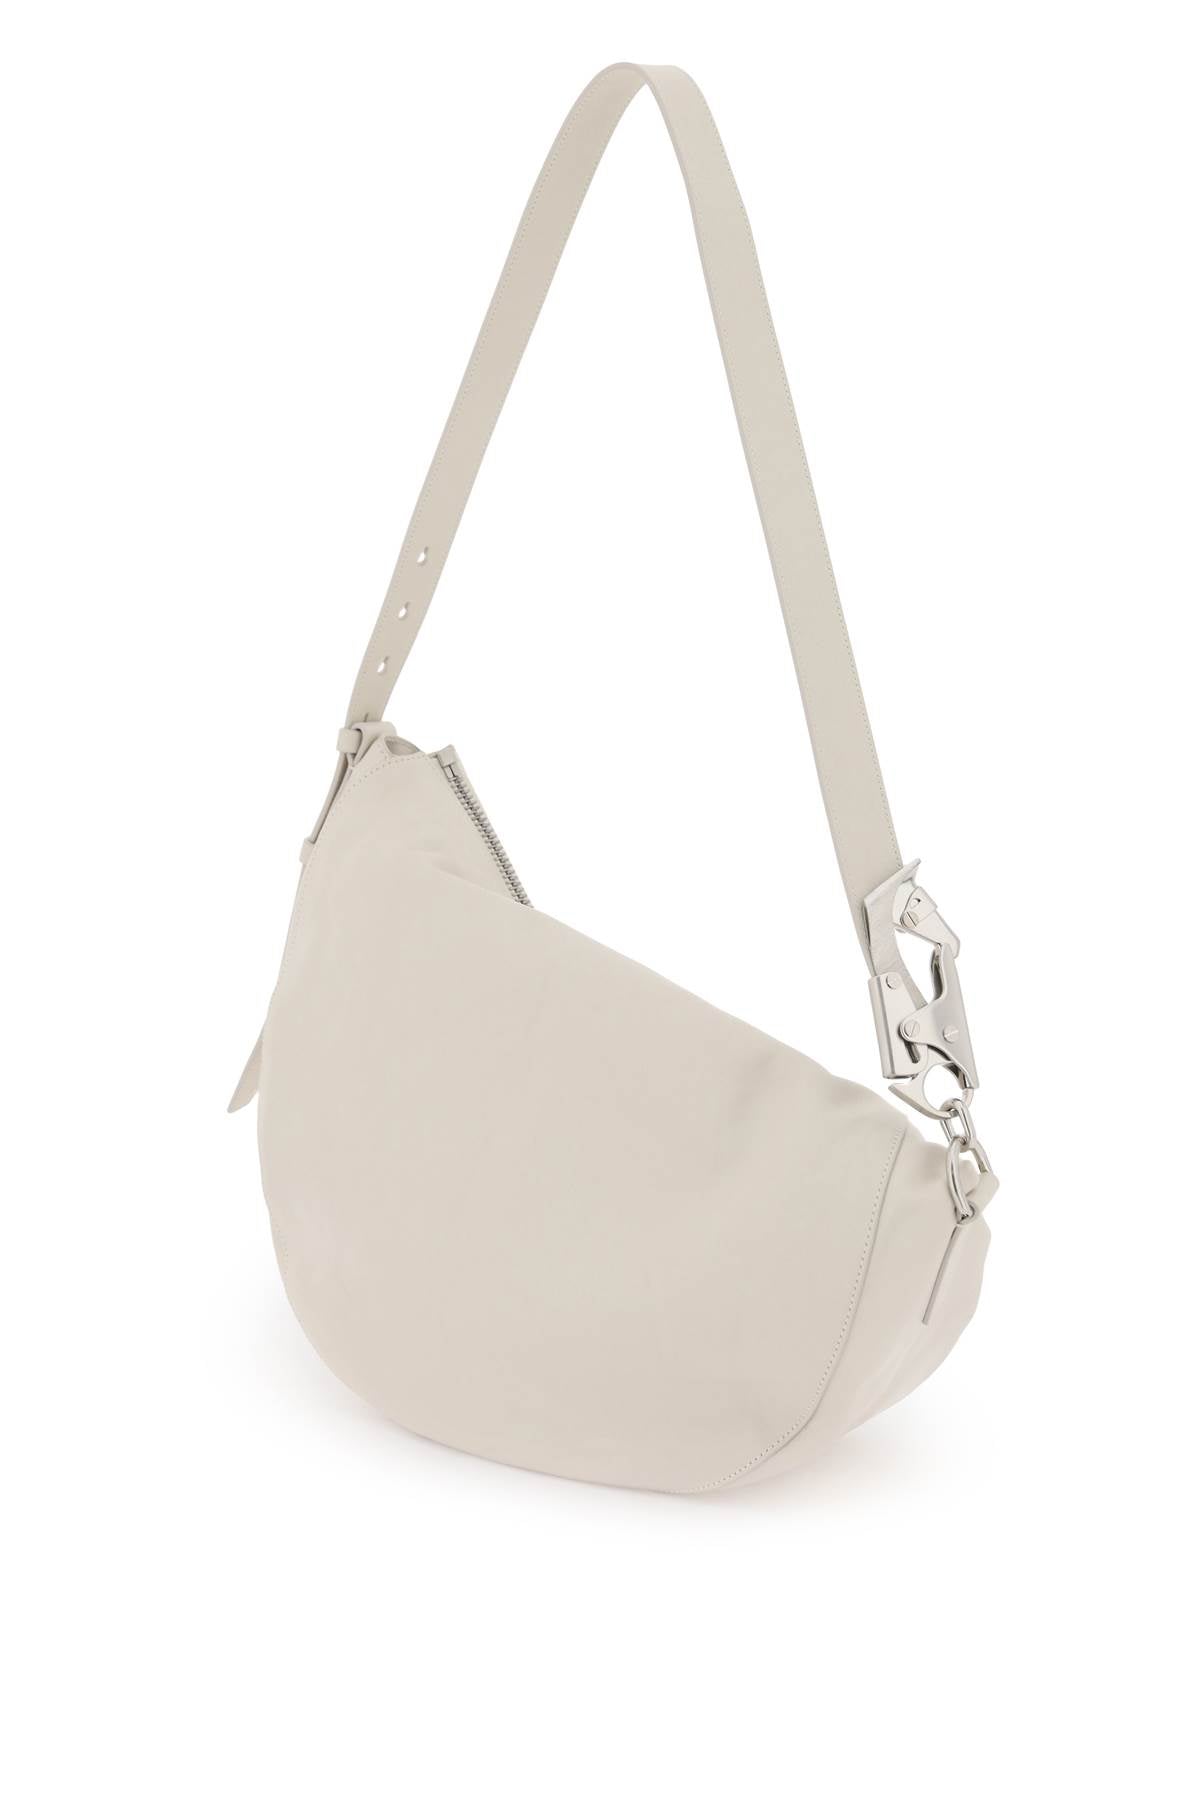 Shop Burberry Medium Knight Handbag In Cream-colored Crinkled Calfskin With Horse-shaped Clip And Hoop In Ivory